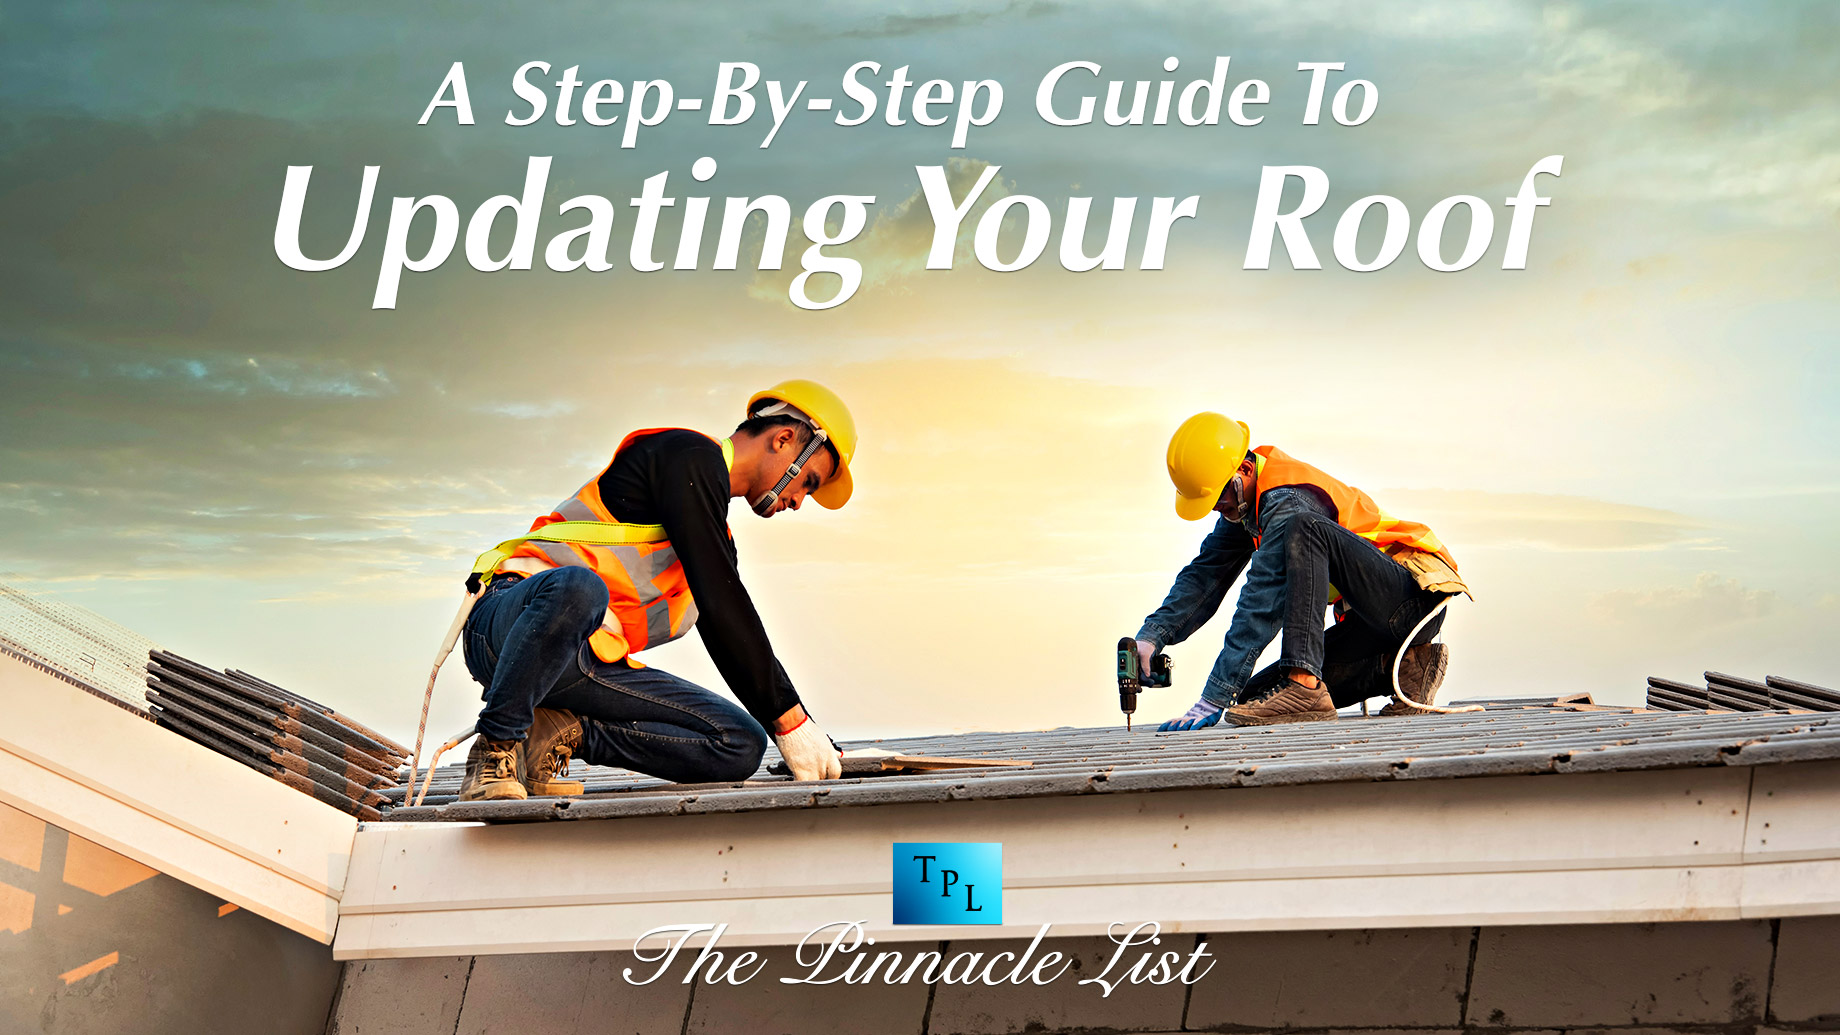 A Step-By-Step Guide To
Updating Your Roof